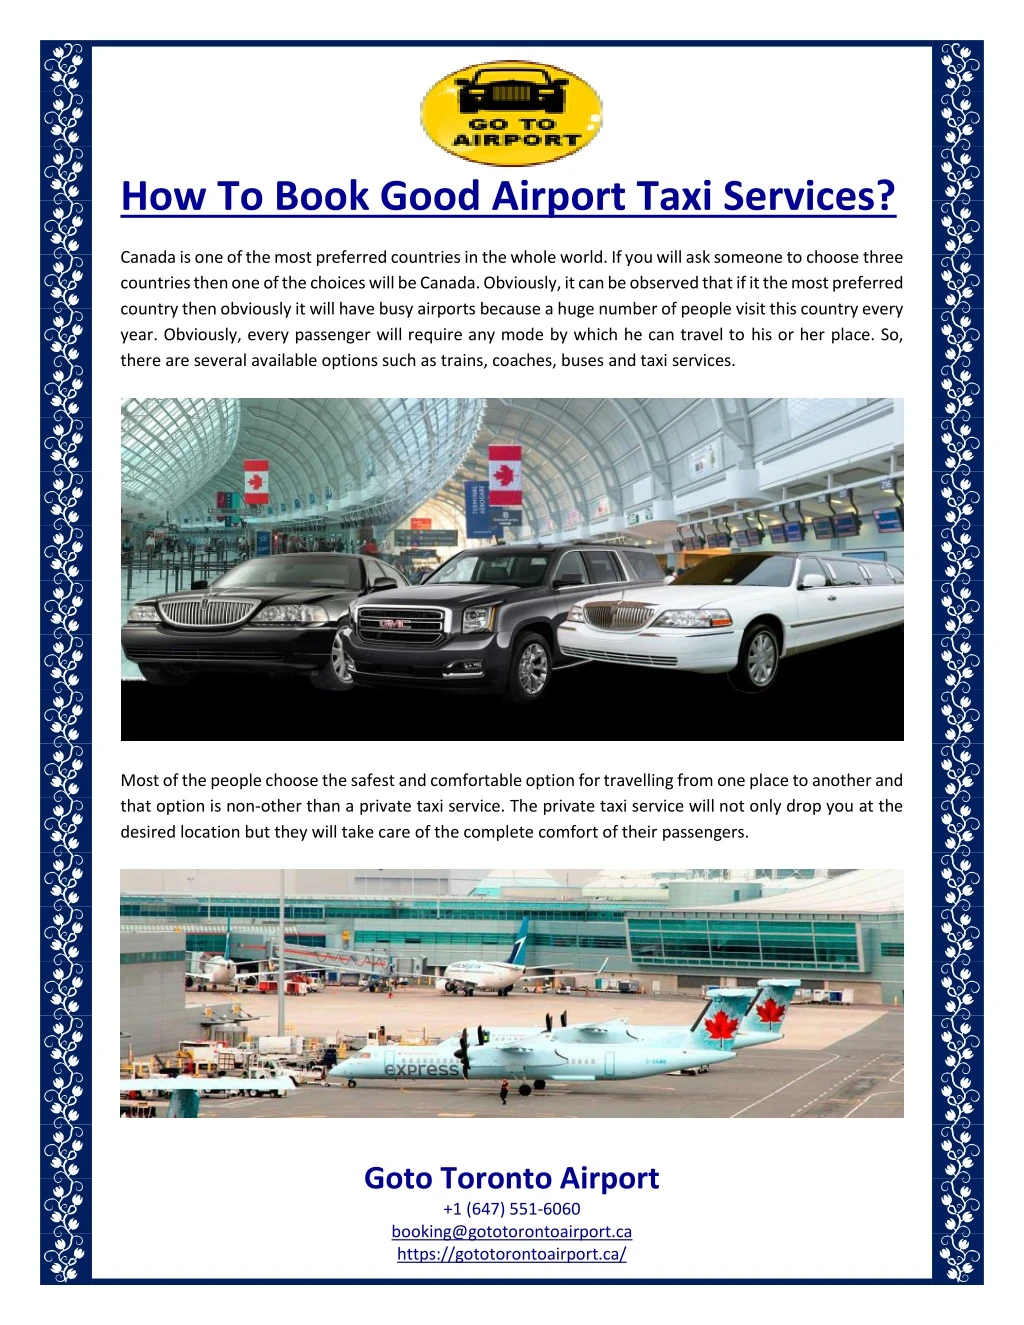 how to book good airport taxi services